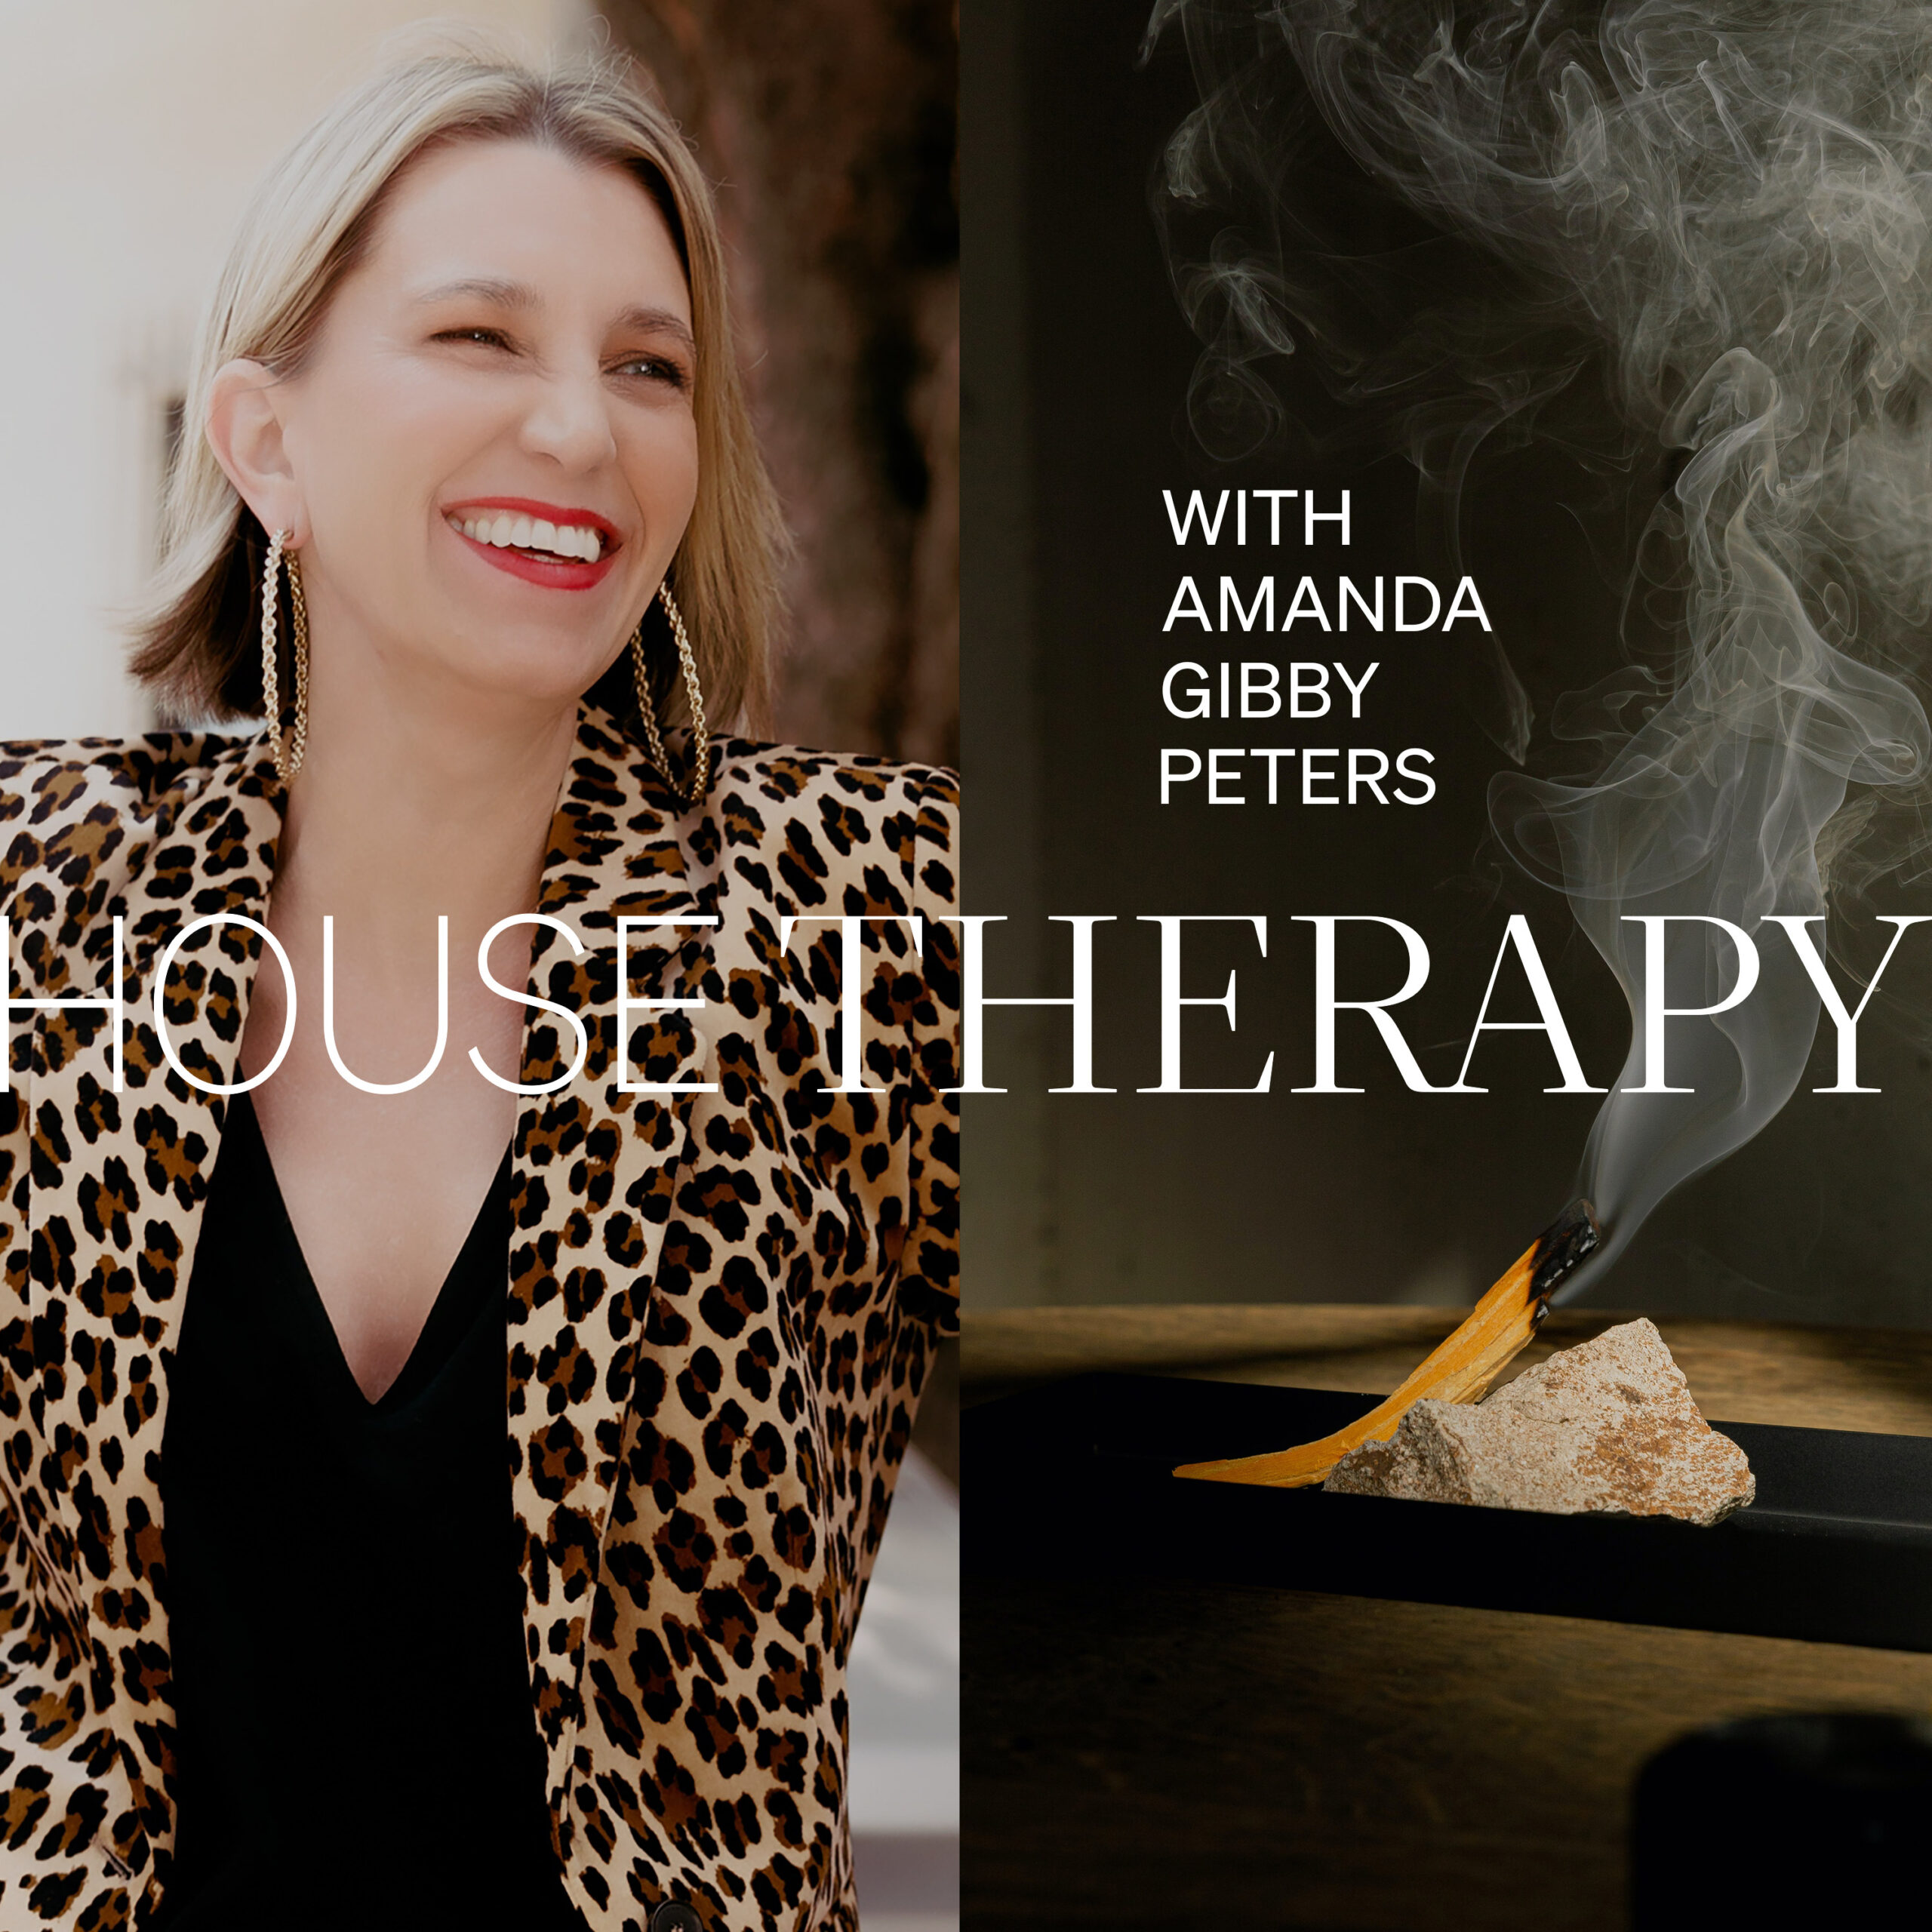 house therapy | is this costing you money?